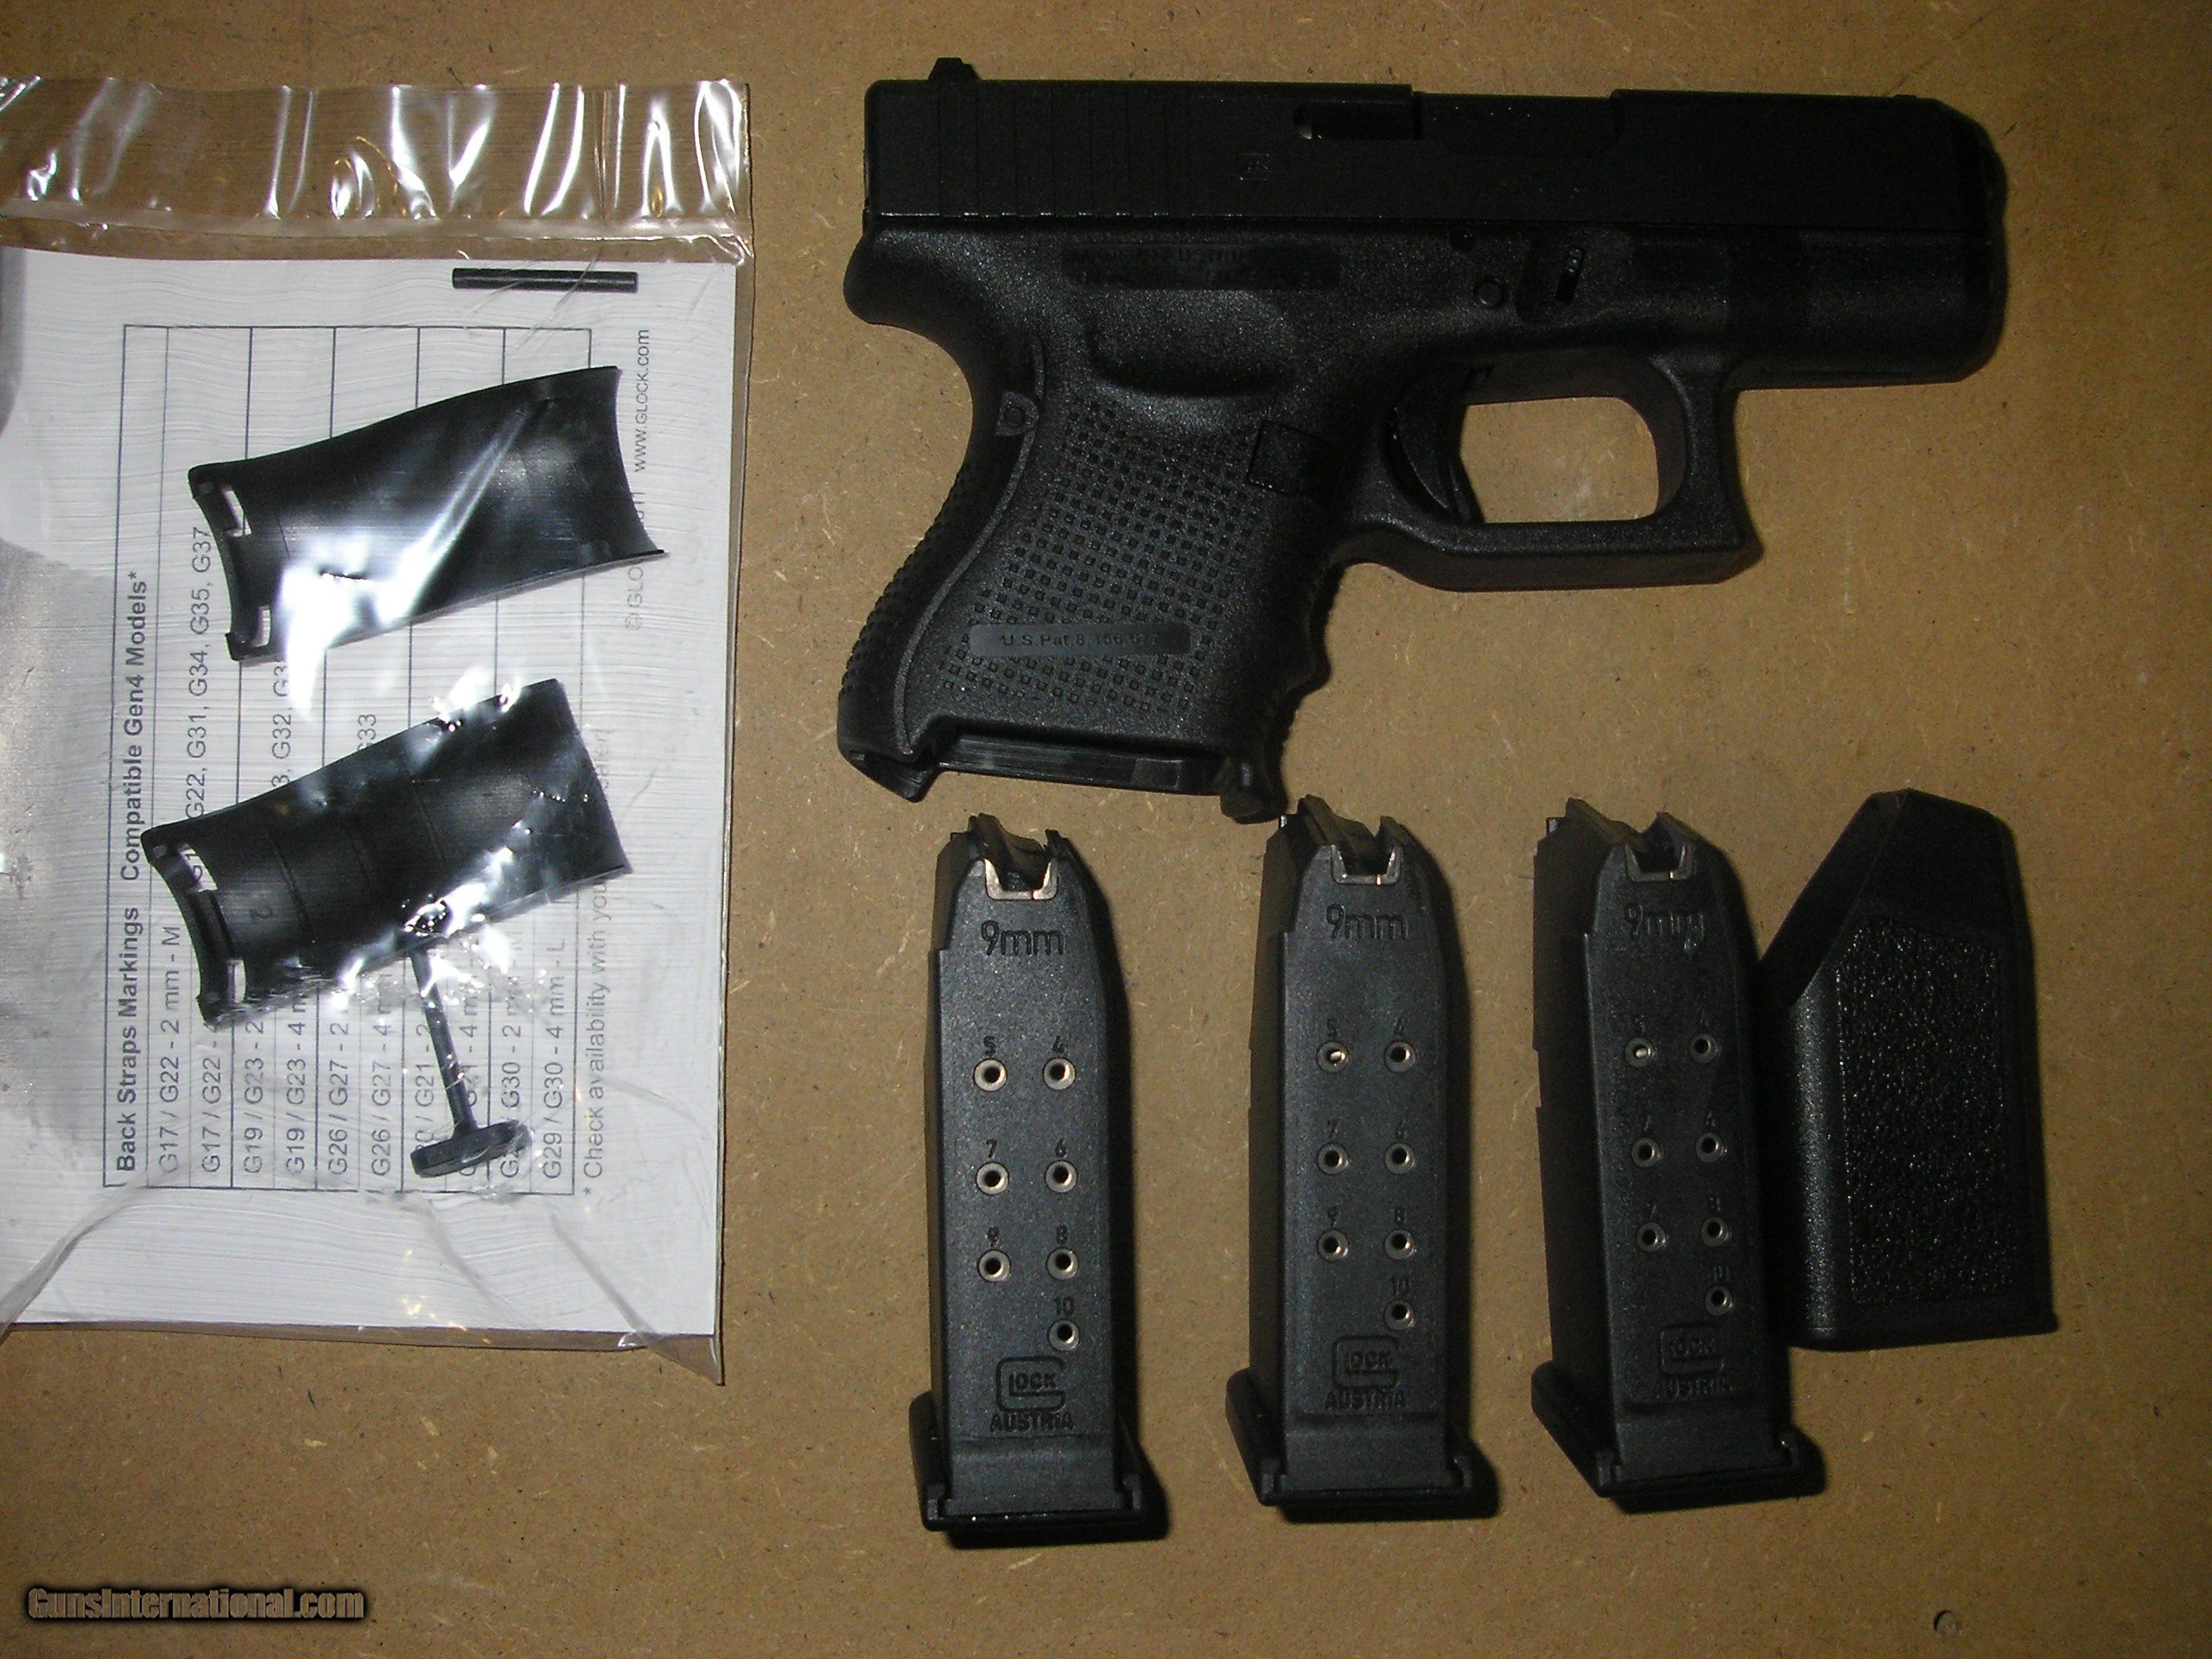 Item Relisted! FS/FT Glock 26 or 27 Magazine Sleeves